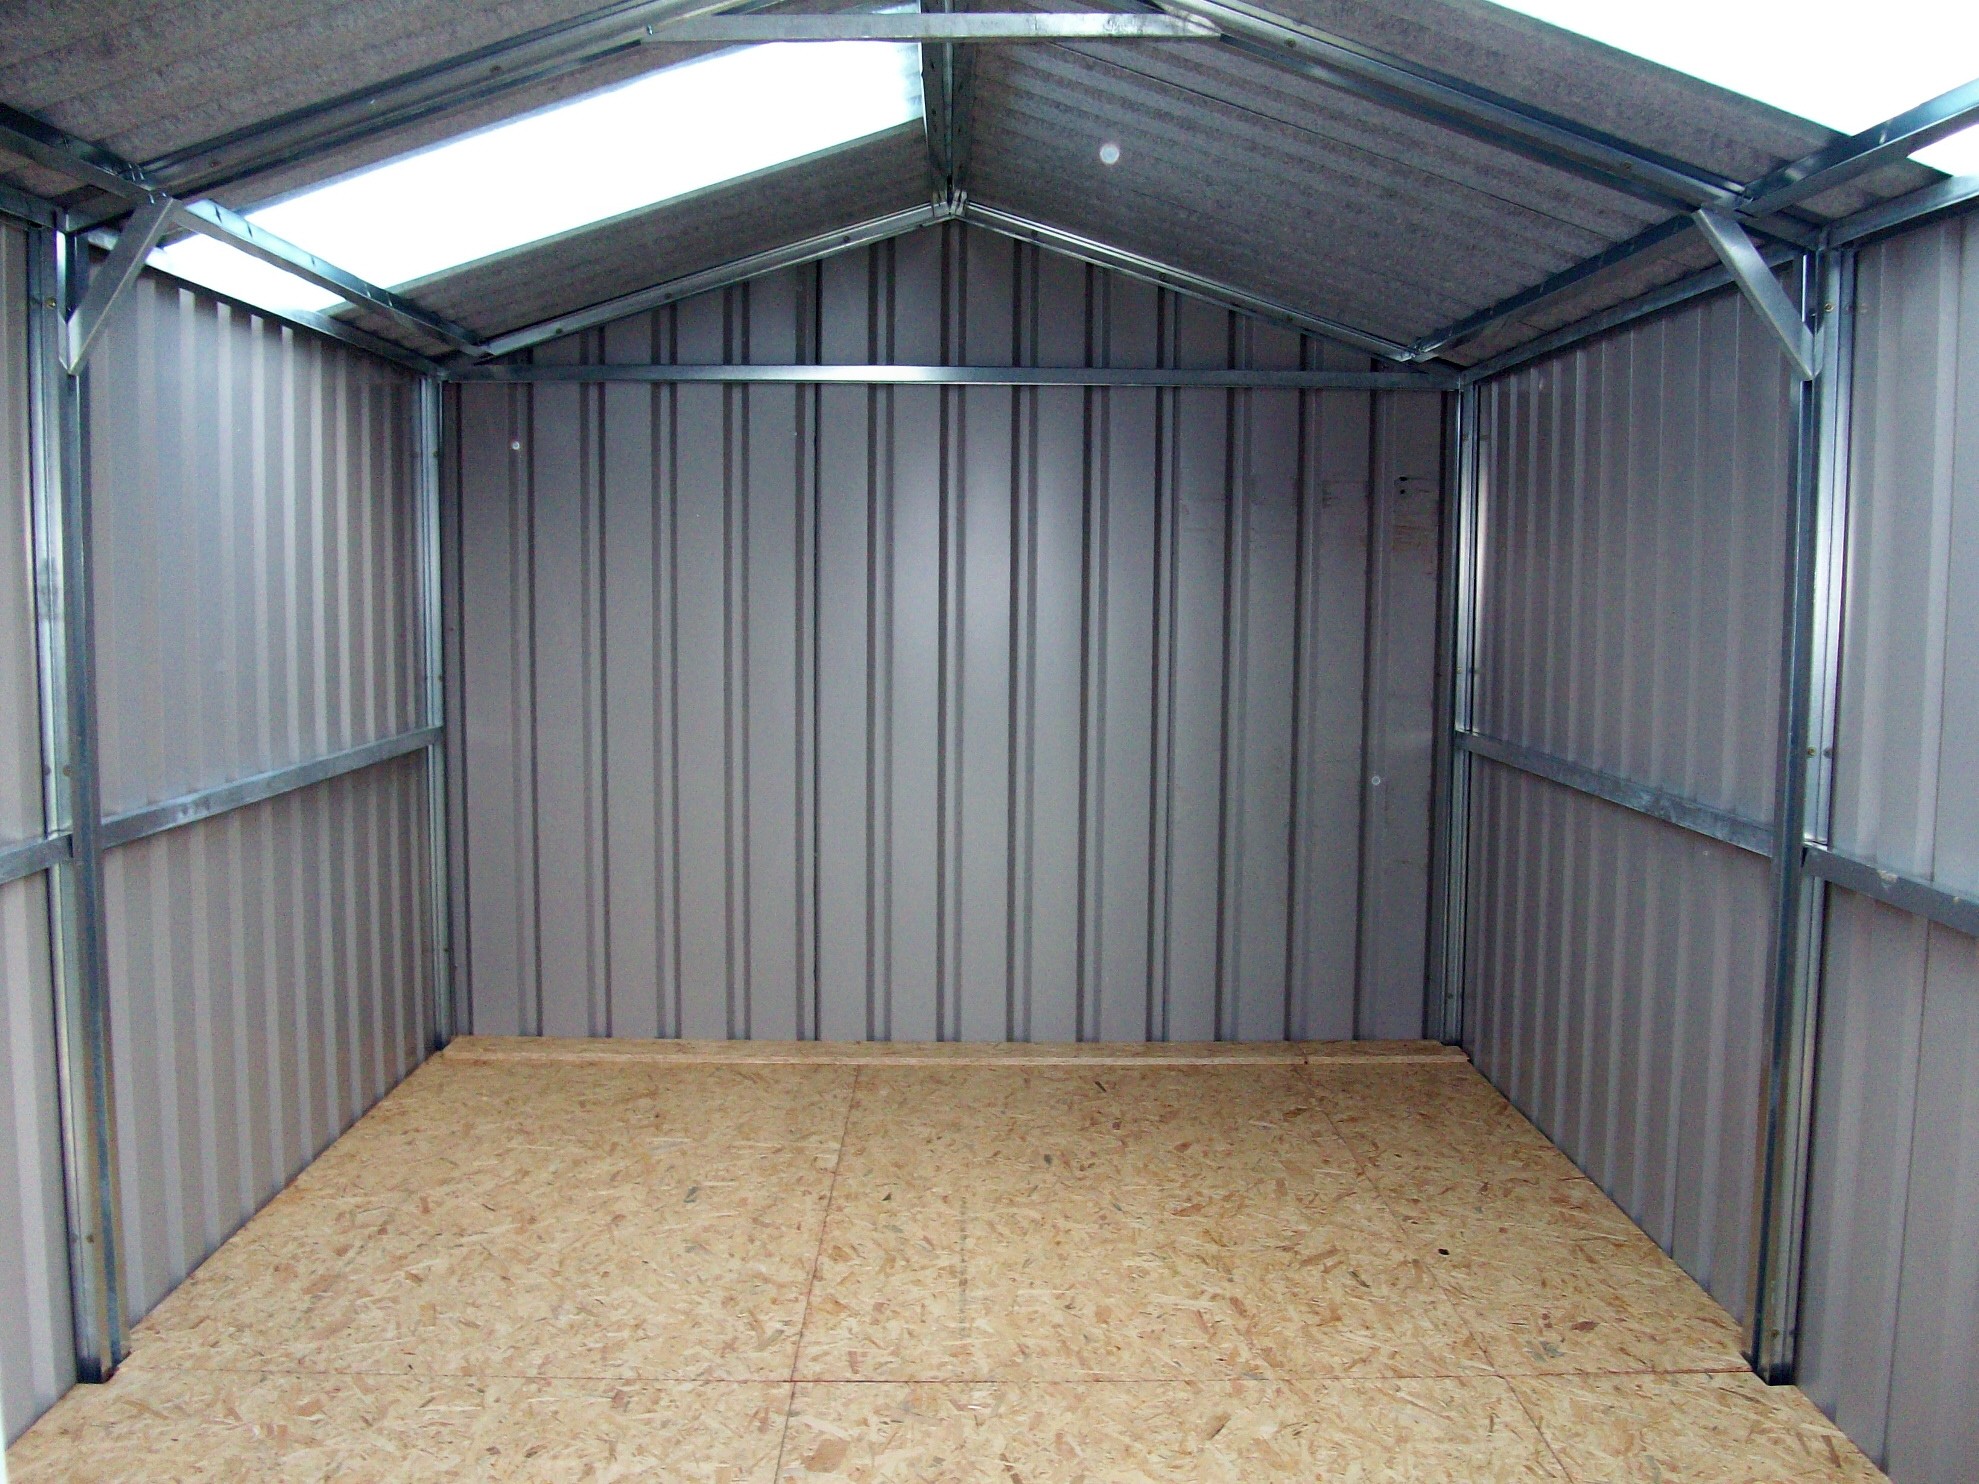 The Mobile Shed – Build a Shed on Skids mymetalbuildings